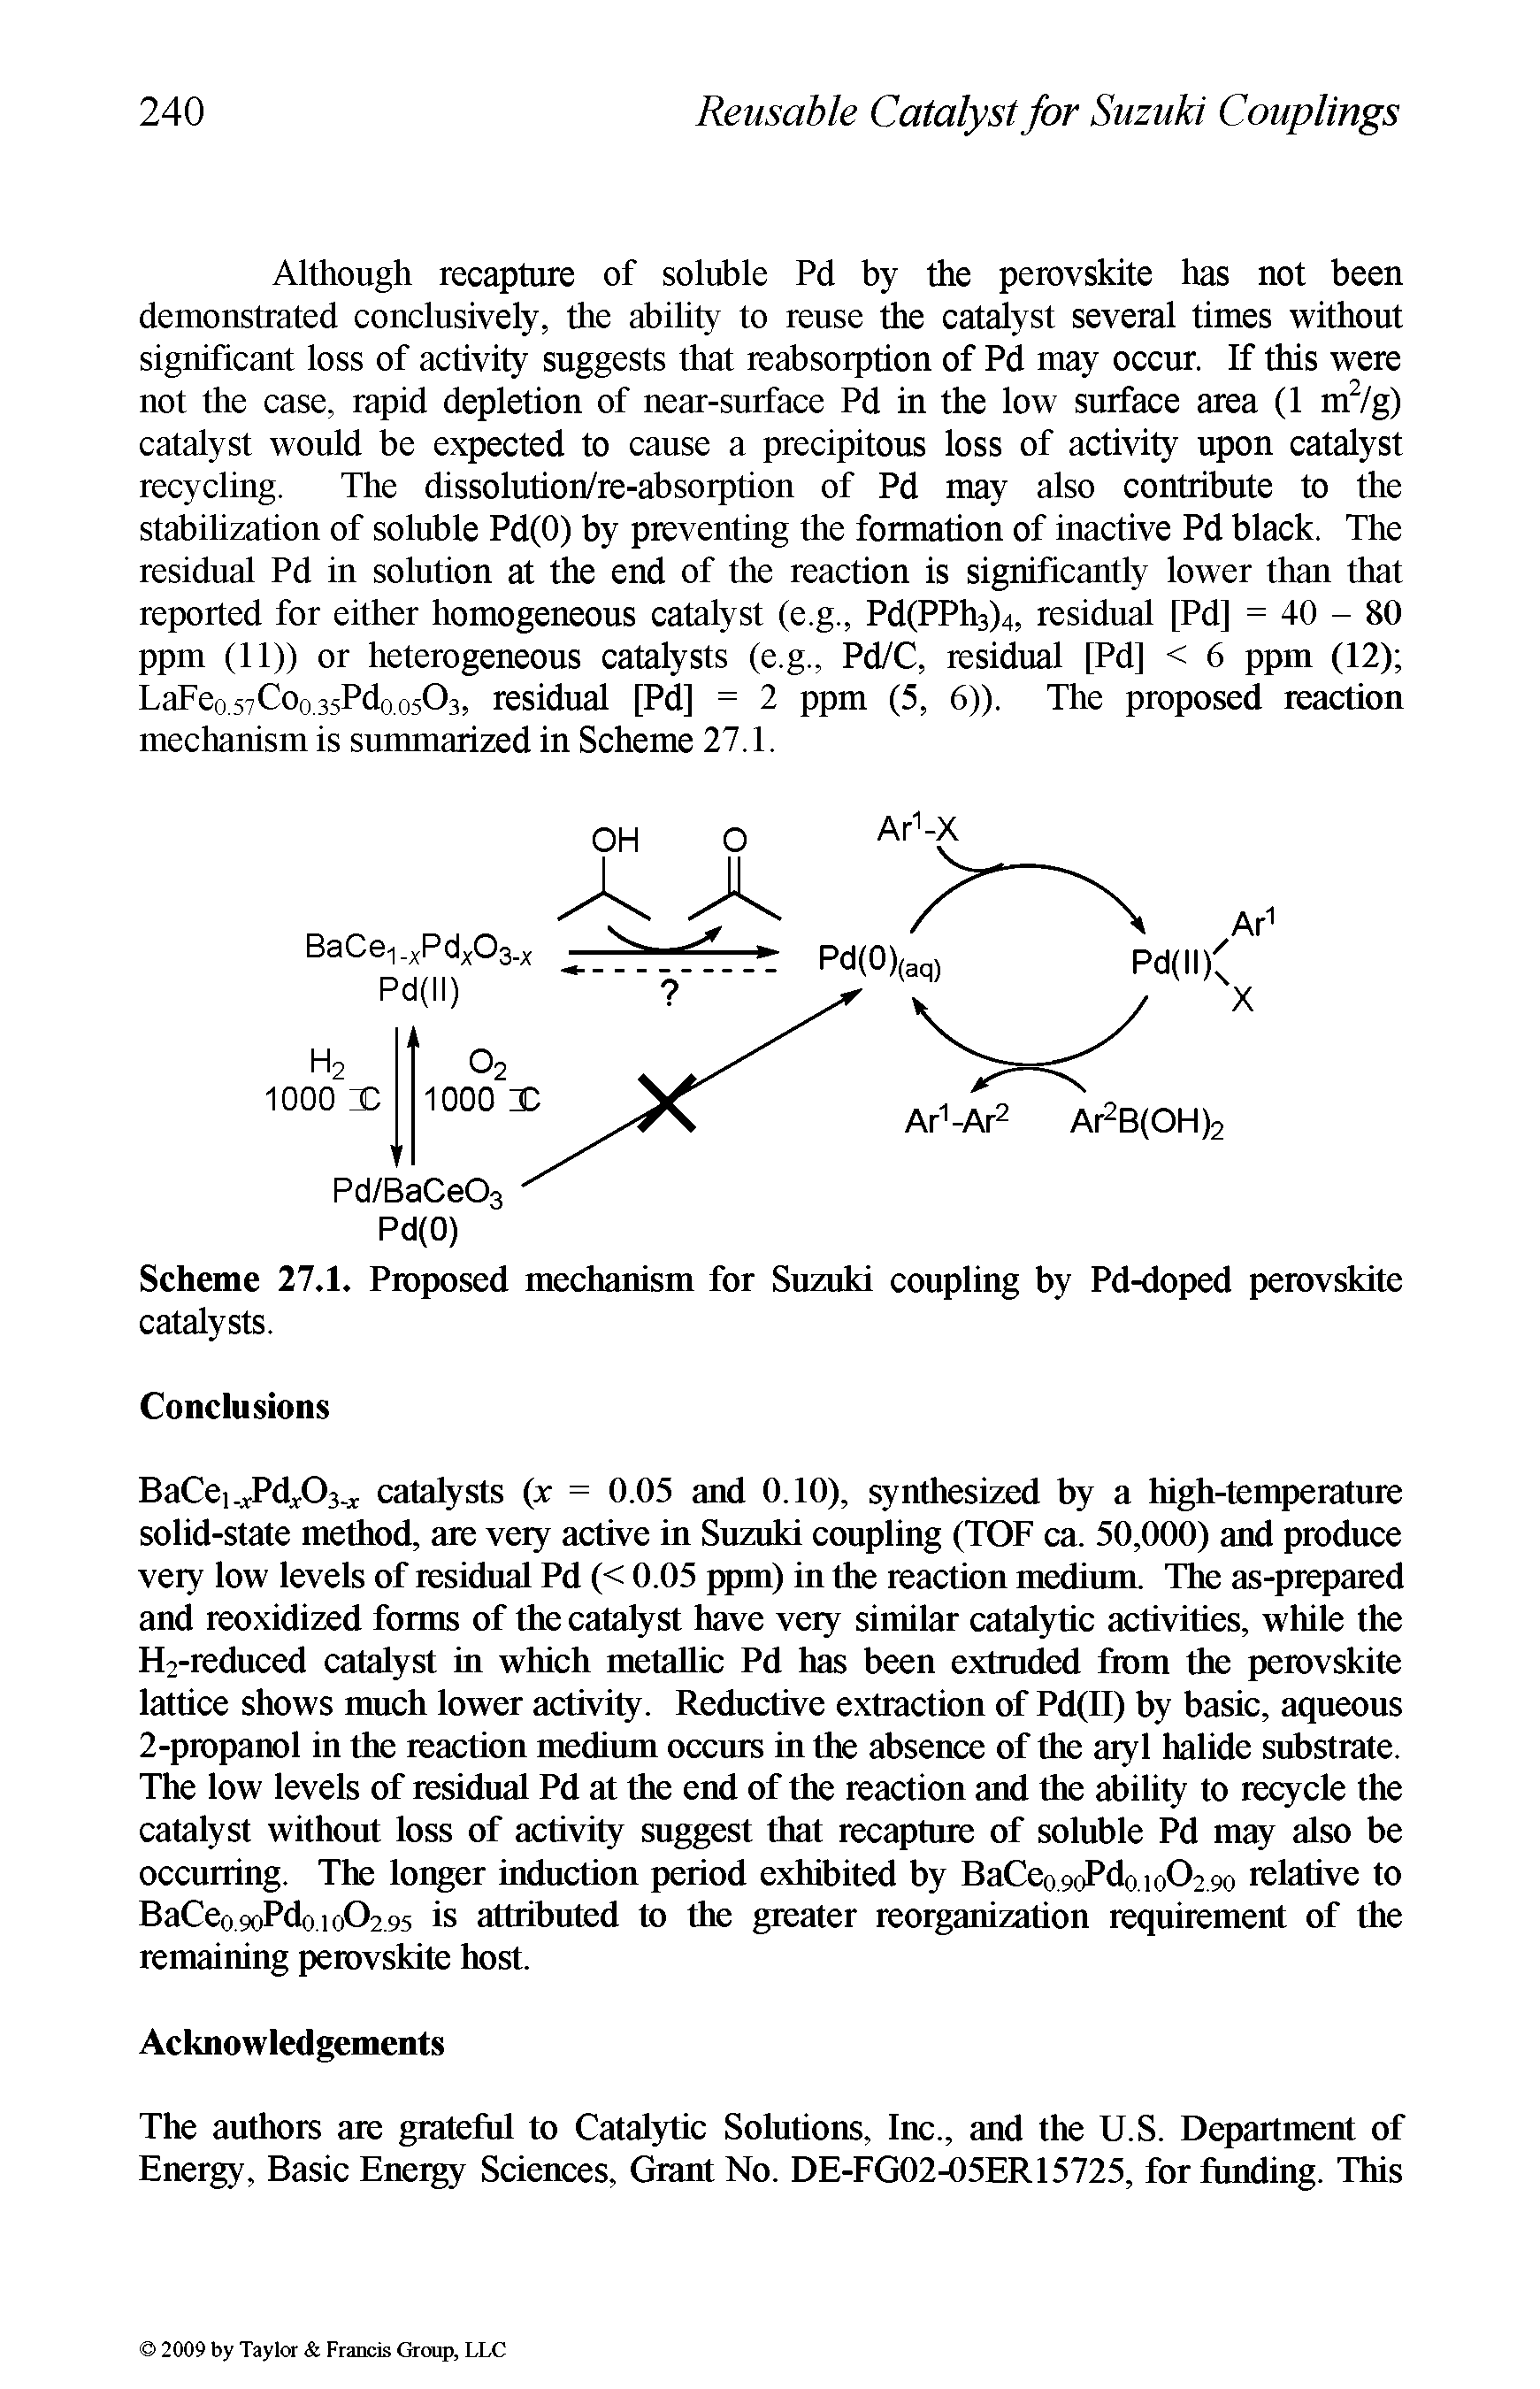 Scheme 27.1. Proposed mechanism for Suzuki coupling by Pd-doped perovskite catalysts.